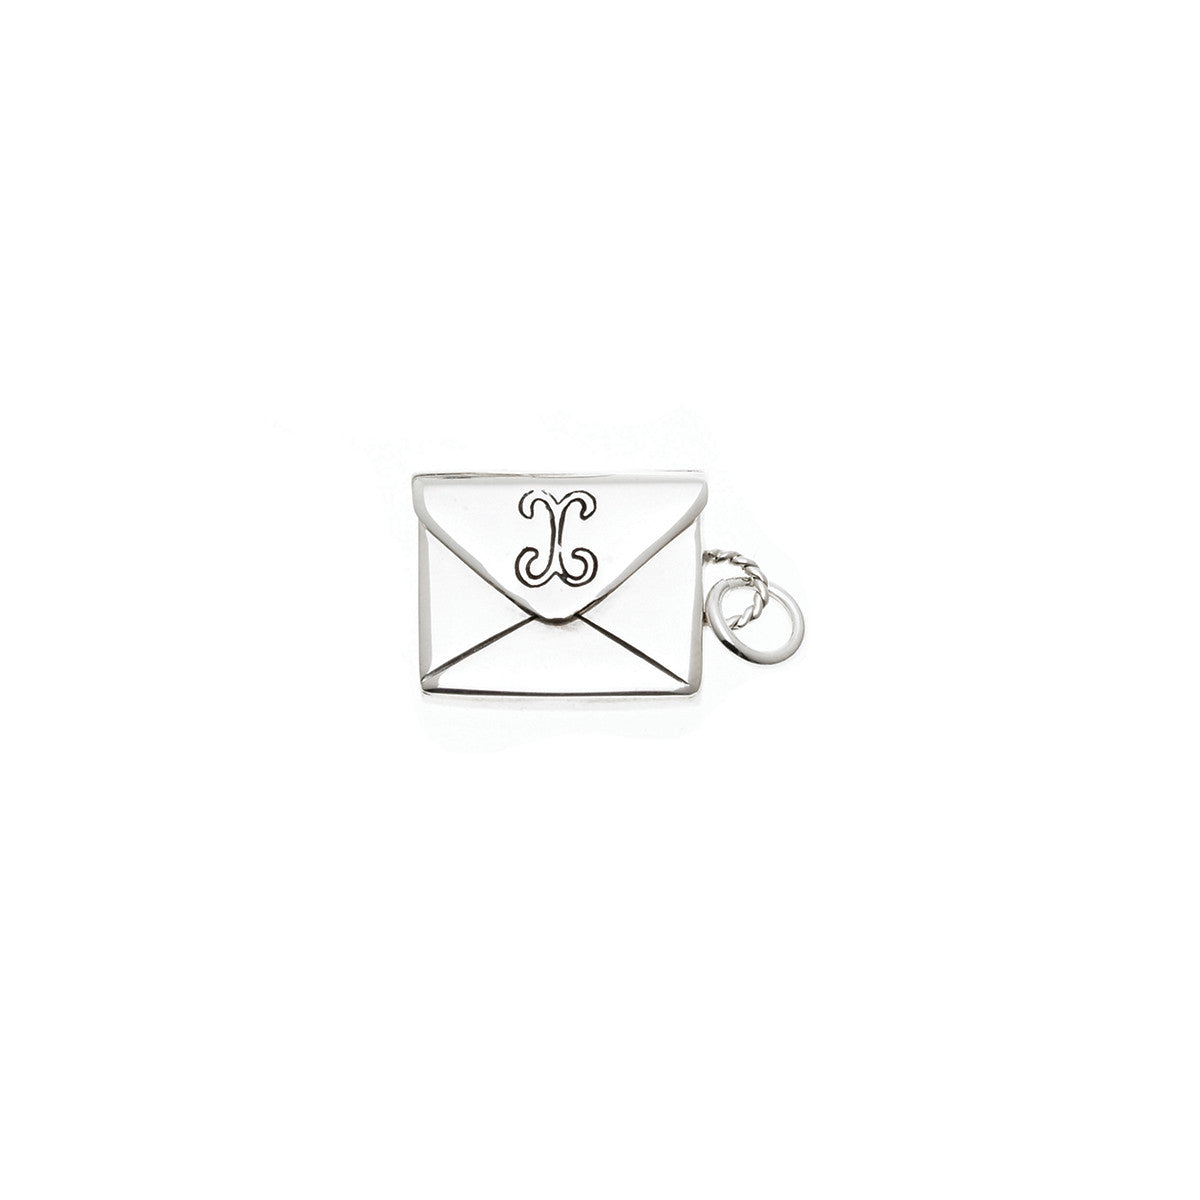 Love Letters Petite Envelope Sterling Silver Charm - Cynthia Gale New York Jewelry